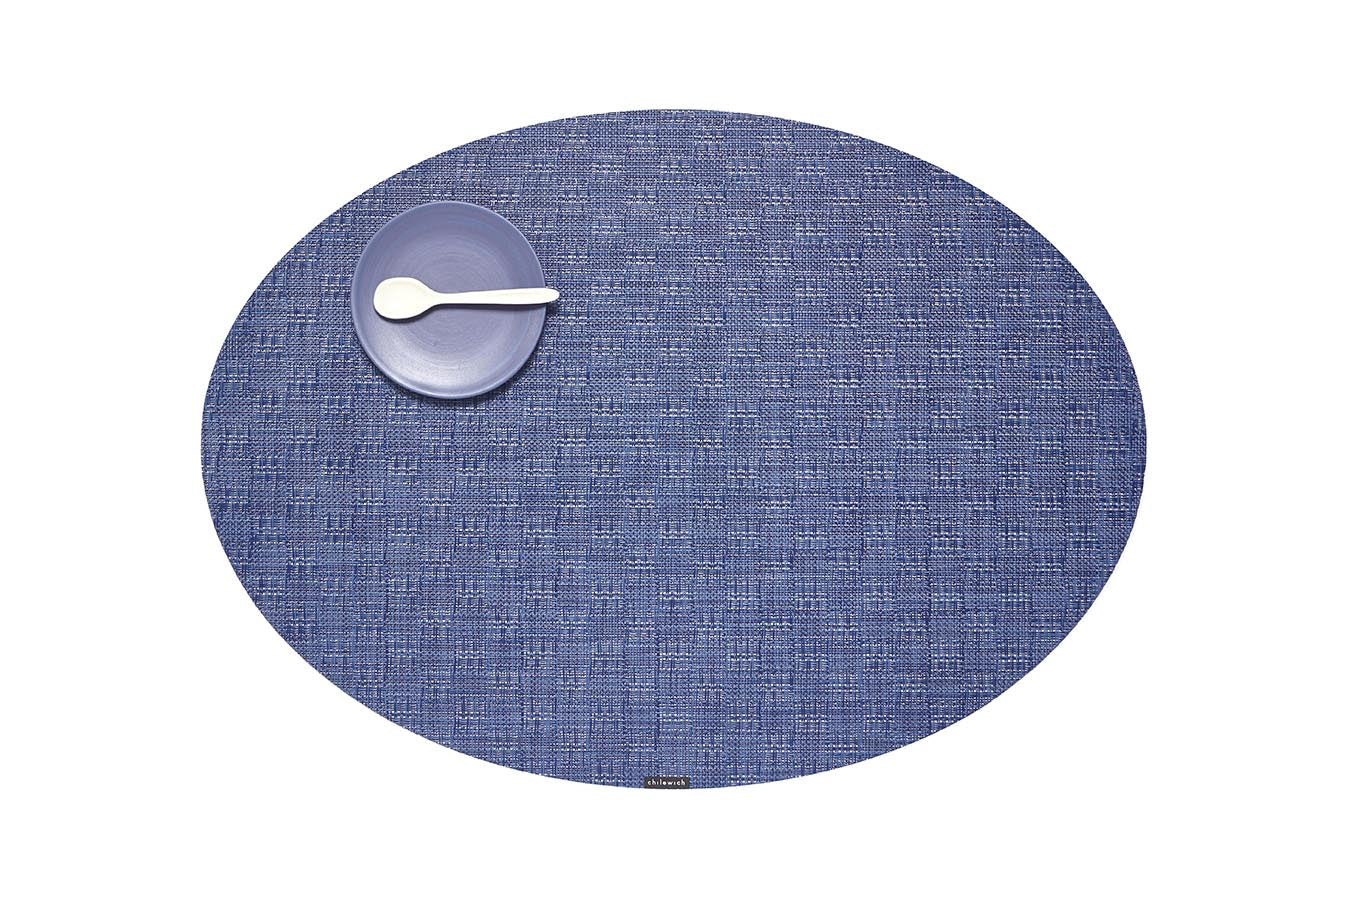 Chilewich Placemat - Bay Weave - Blue Jean